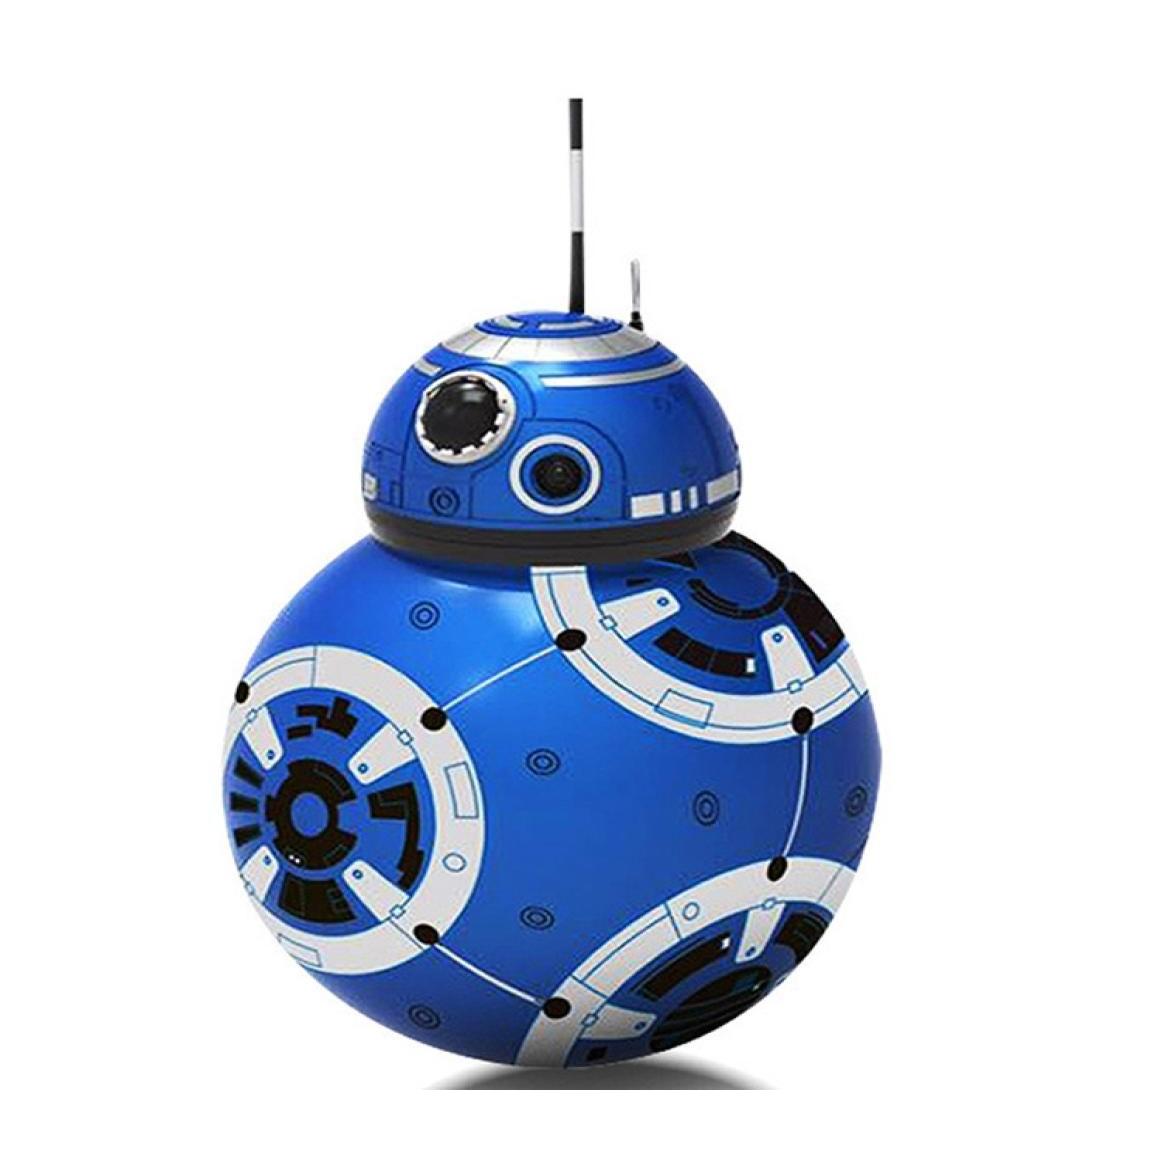 Animali elettrici/RC RC BB8 Droid Robot Ball Intelligent Action Kid Toy Regalo con suono remoto 24g 80255567 Droping Delivery Dhings DHSQL